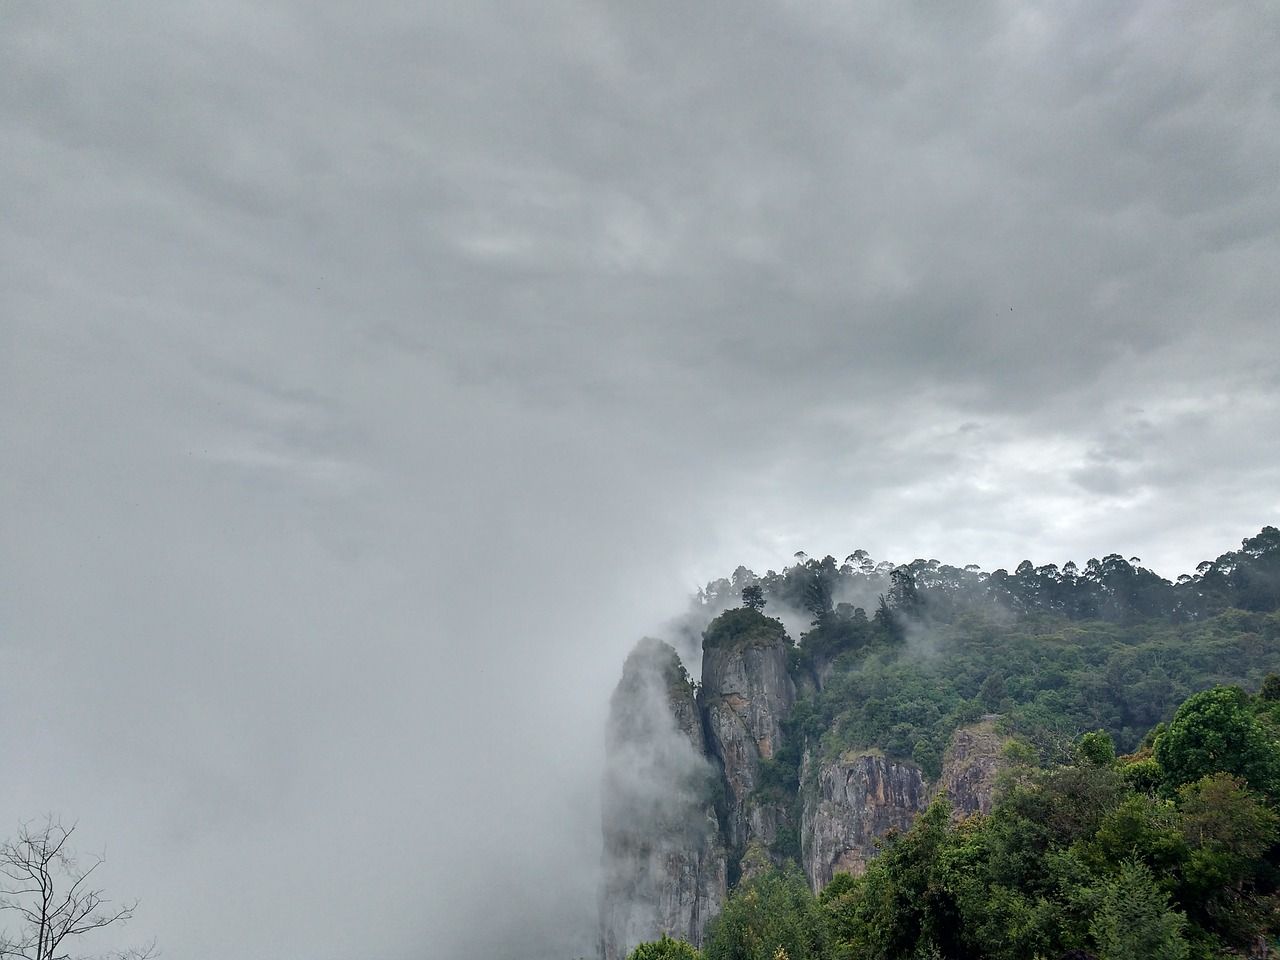 Handy Kodaikanal Travel Guide: Top Places, Things to Do & More